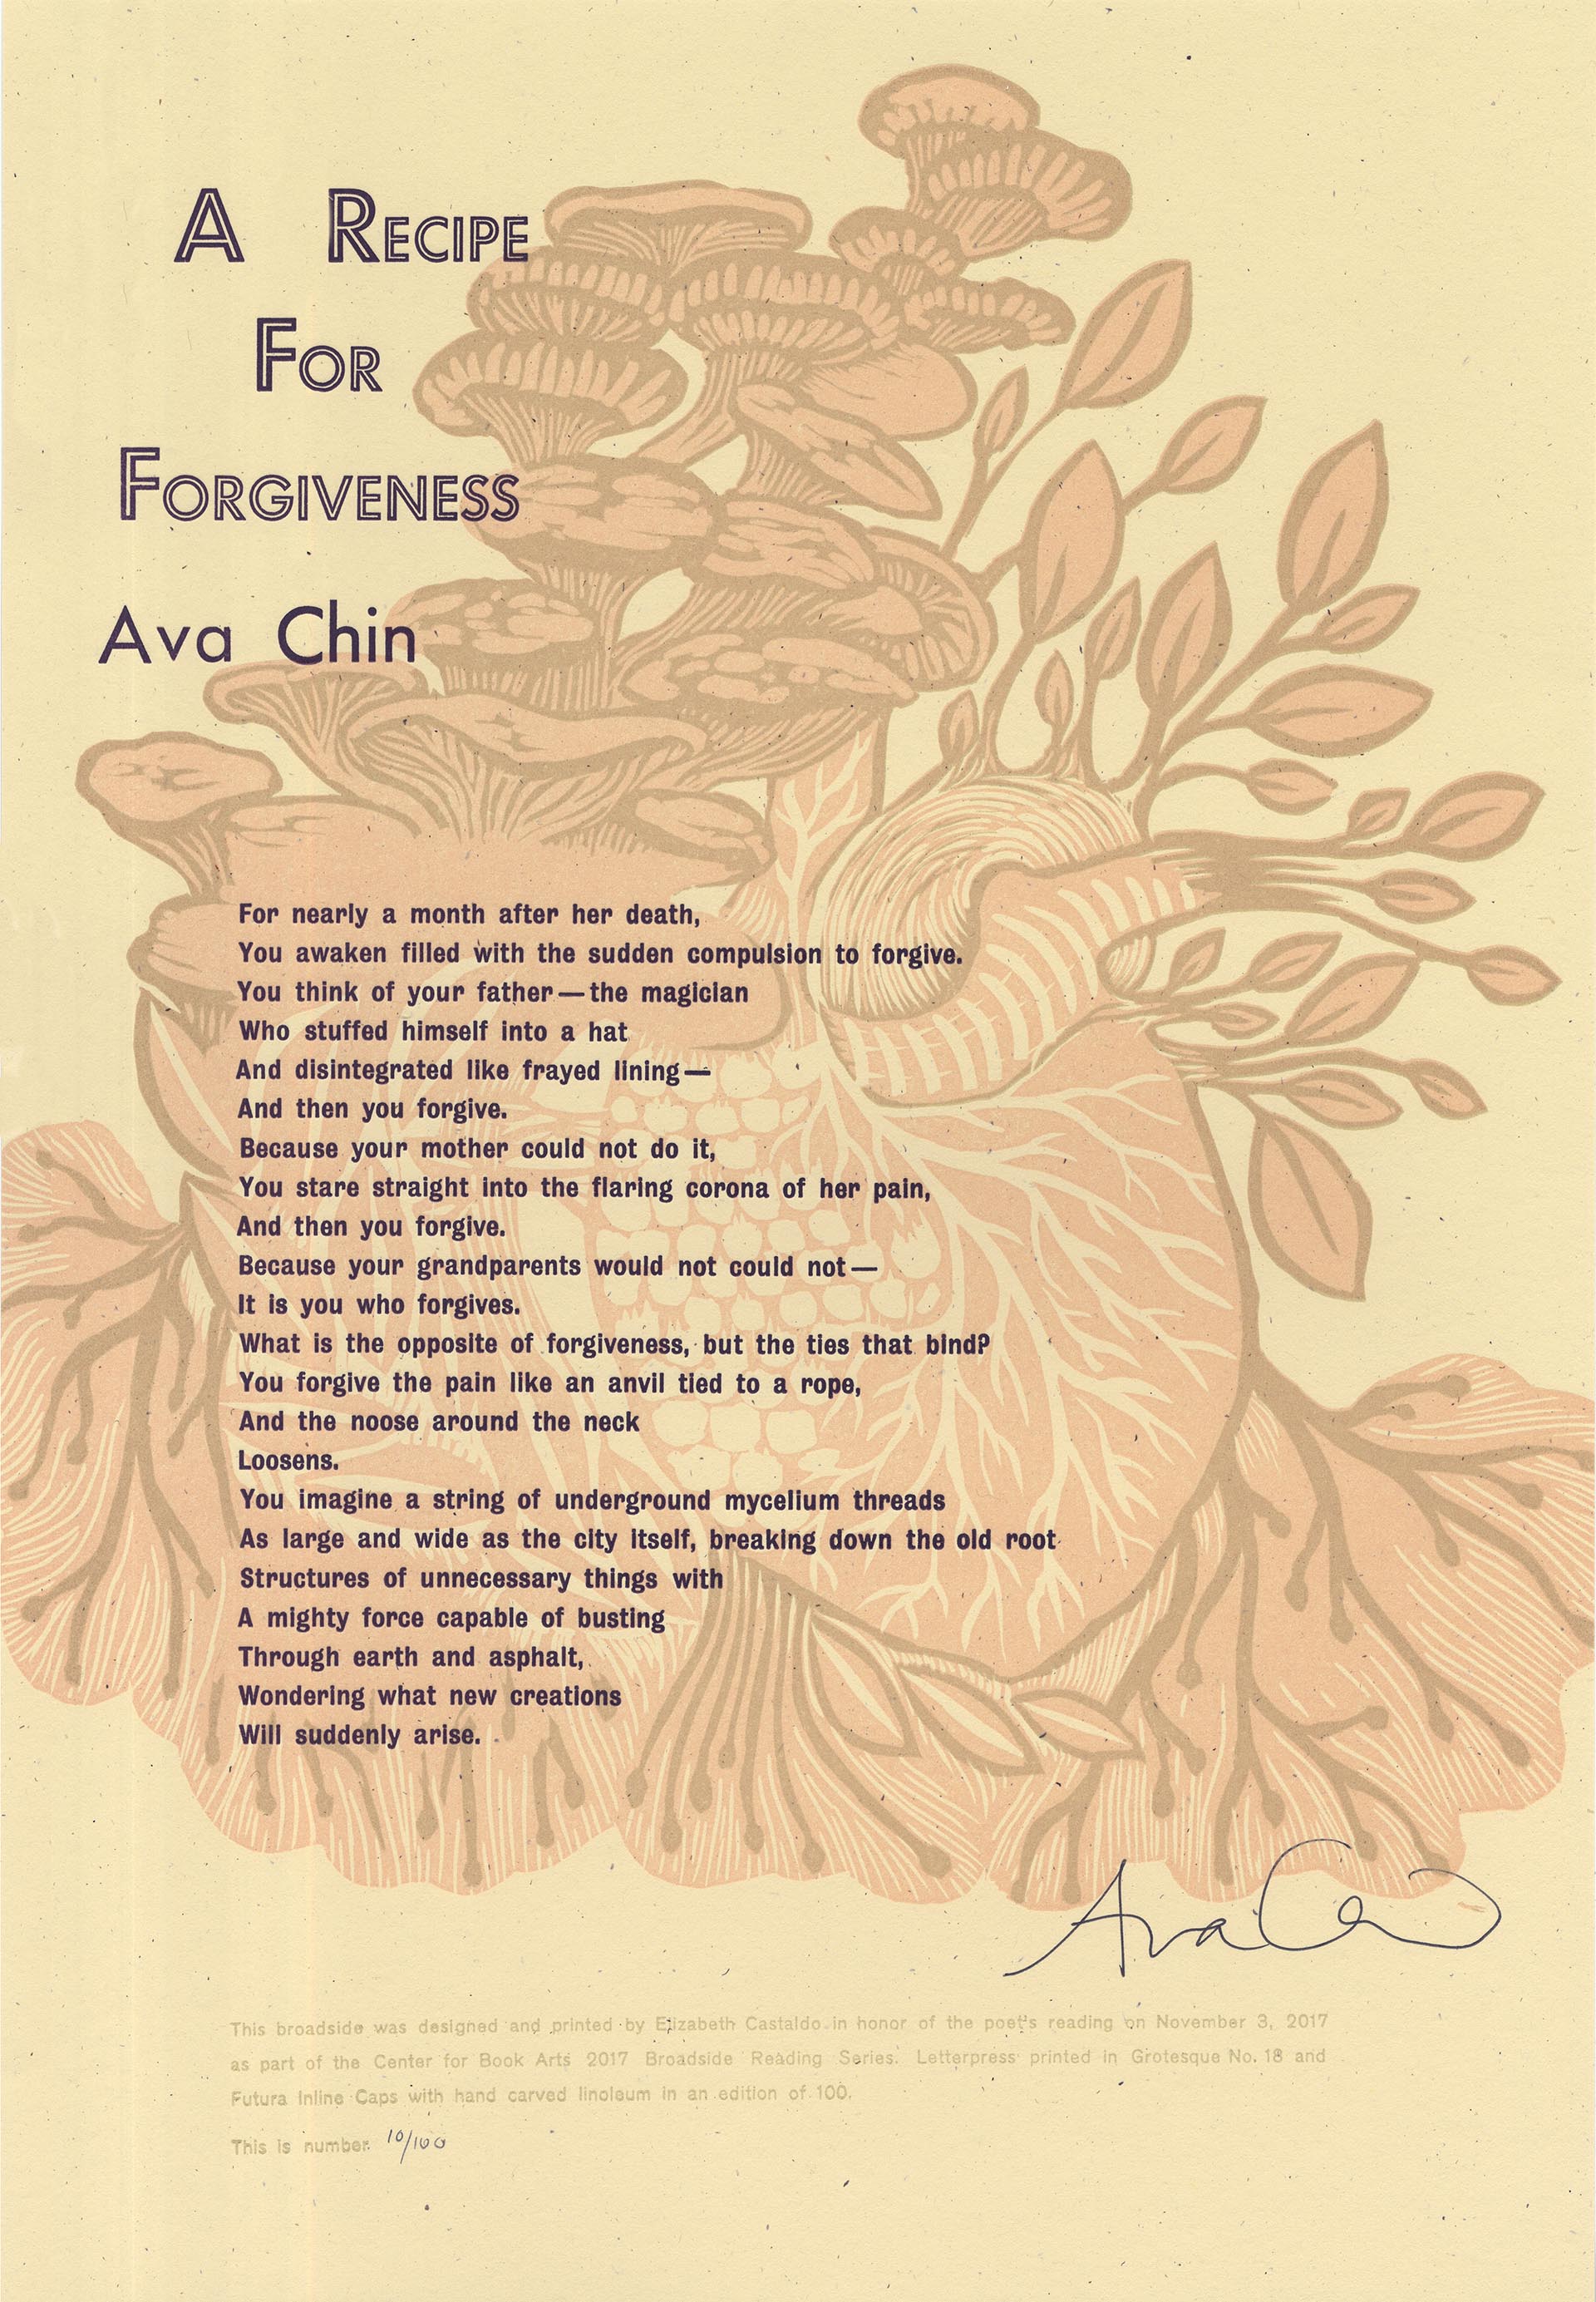 Collaboration with Poet Ava Chin